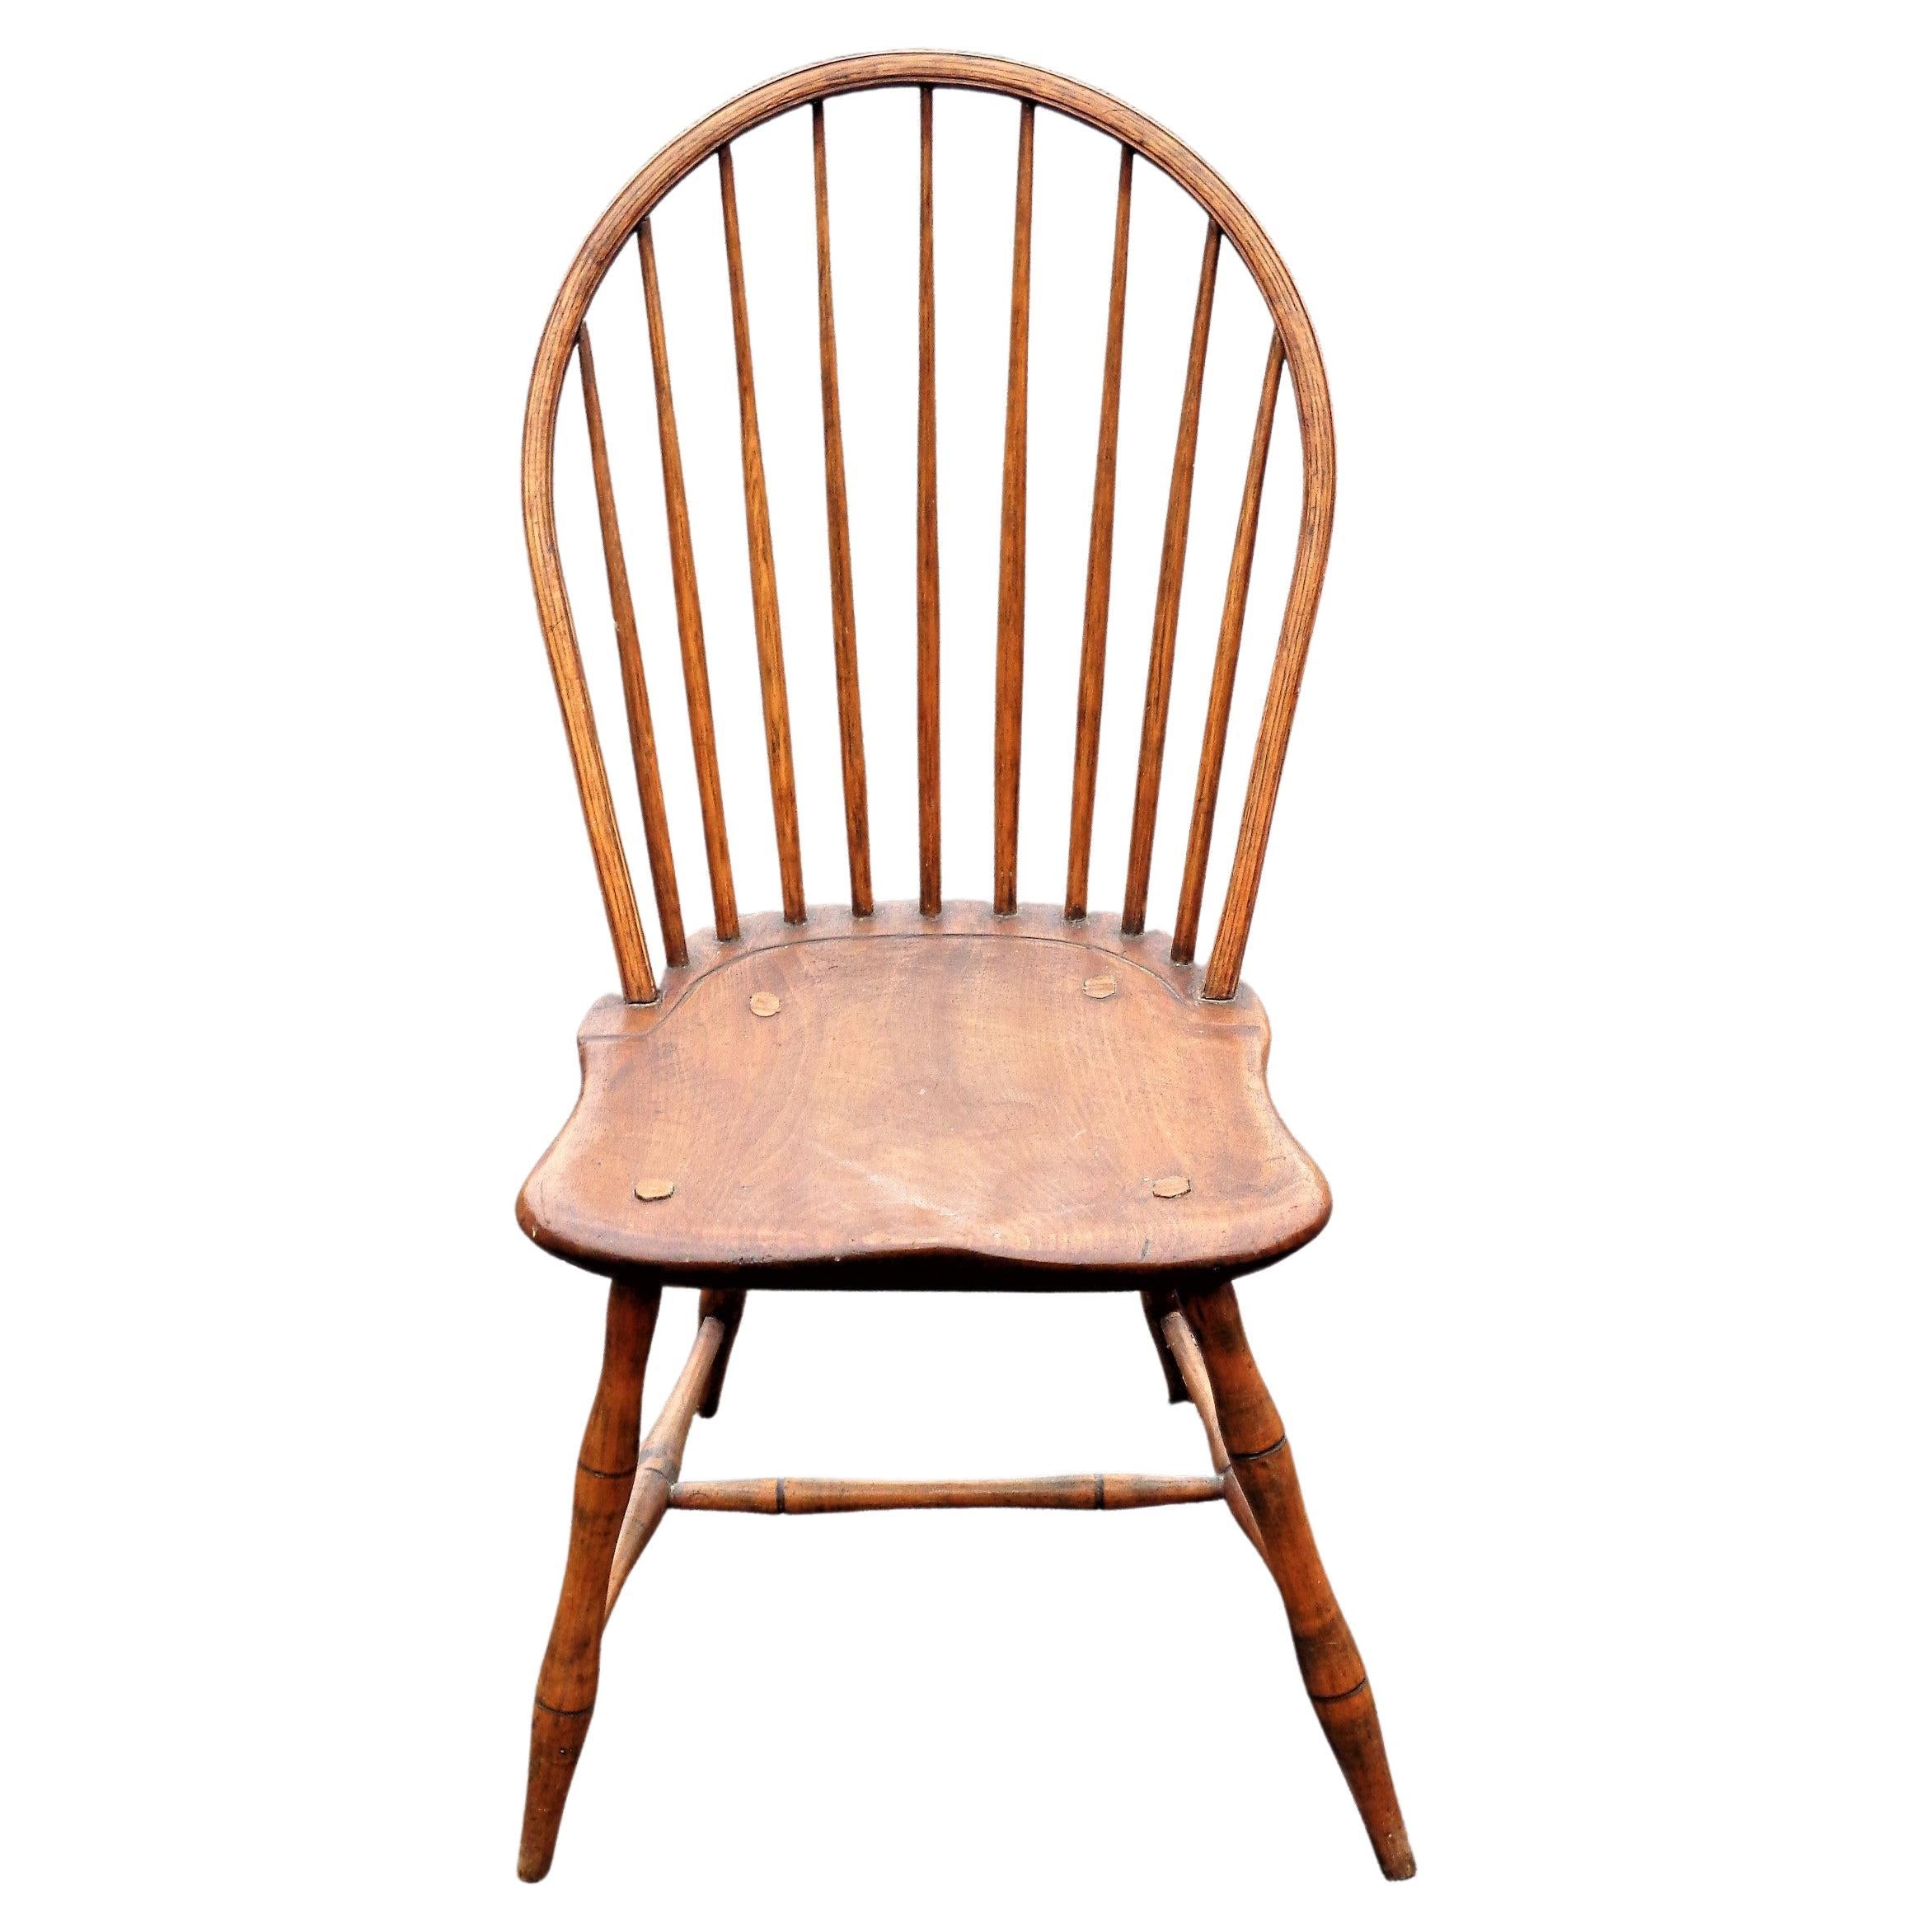  18th Century American Bow Back Windsor Chairs 2